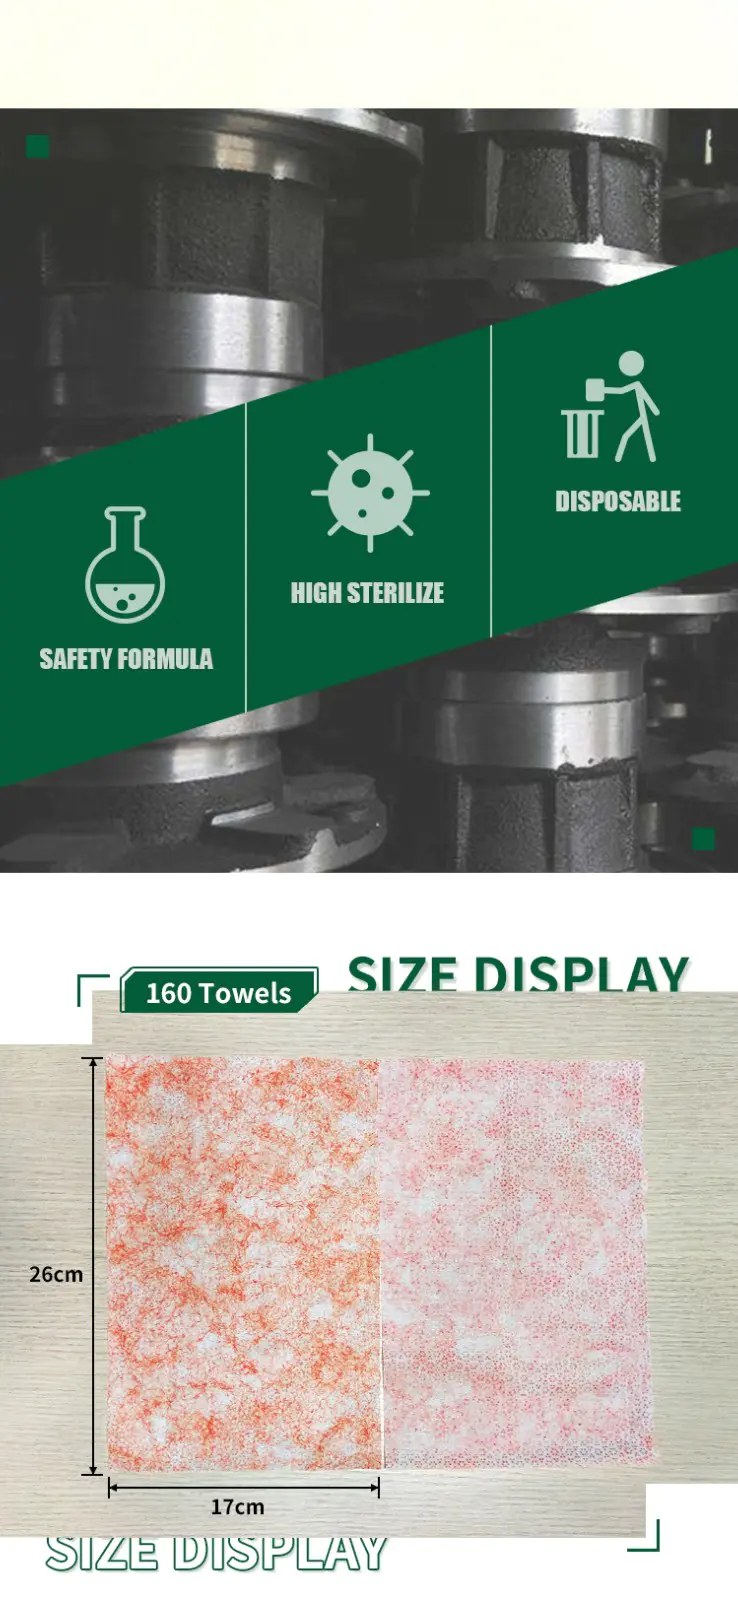 Ming Yu non-woven fabric manufacturing Supply